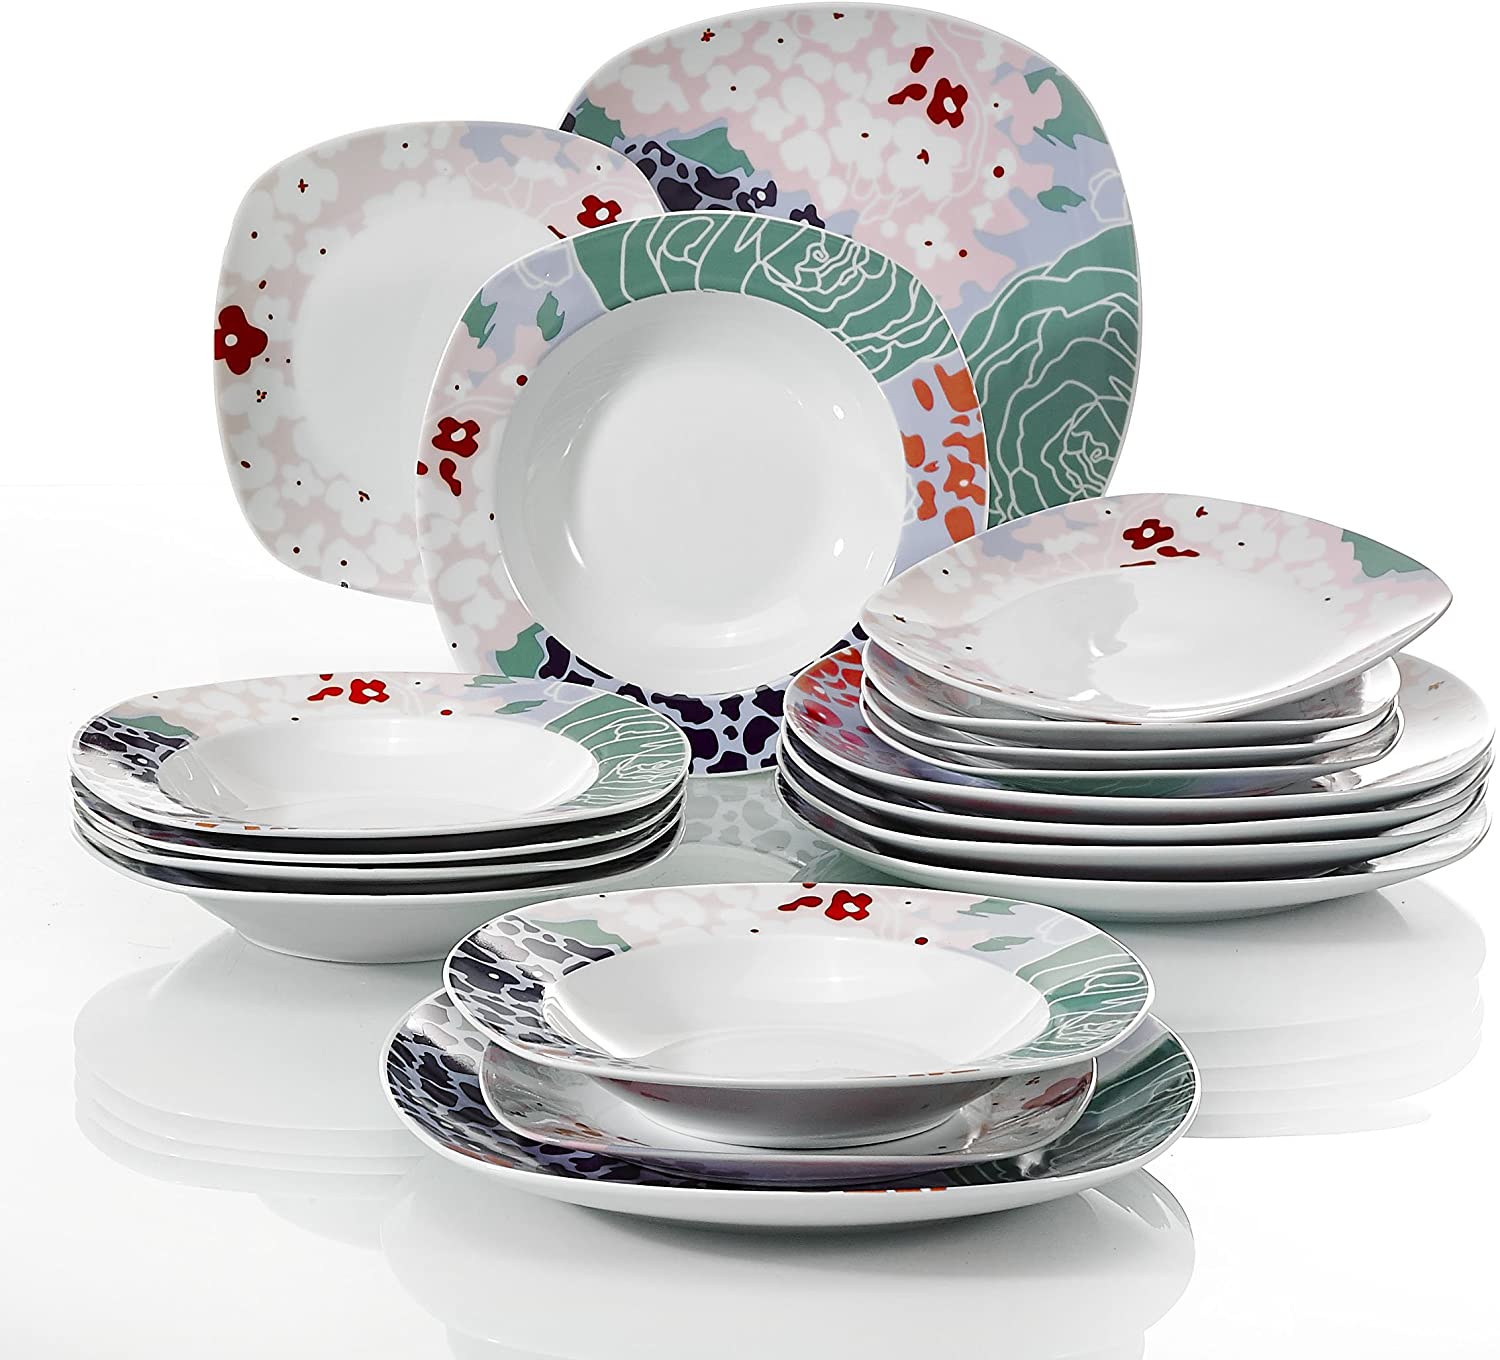 Veweet Olina Porcelain Dinner Set 30 Pieces / 60 Pieces Dinner Service Including Coffee Cups 175 ml, Saucer, Dessert Plate, Dinner Plate and Soup Plate, for 6/12 People